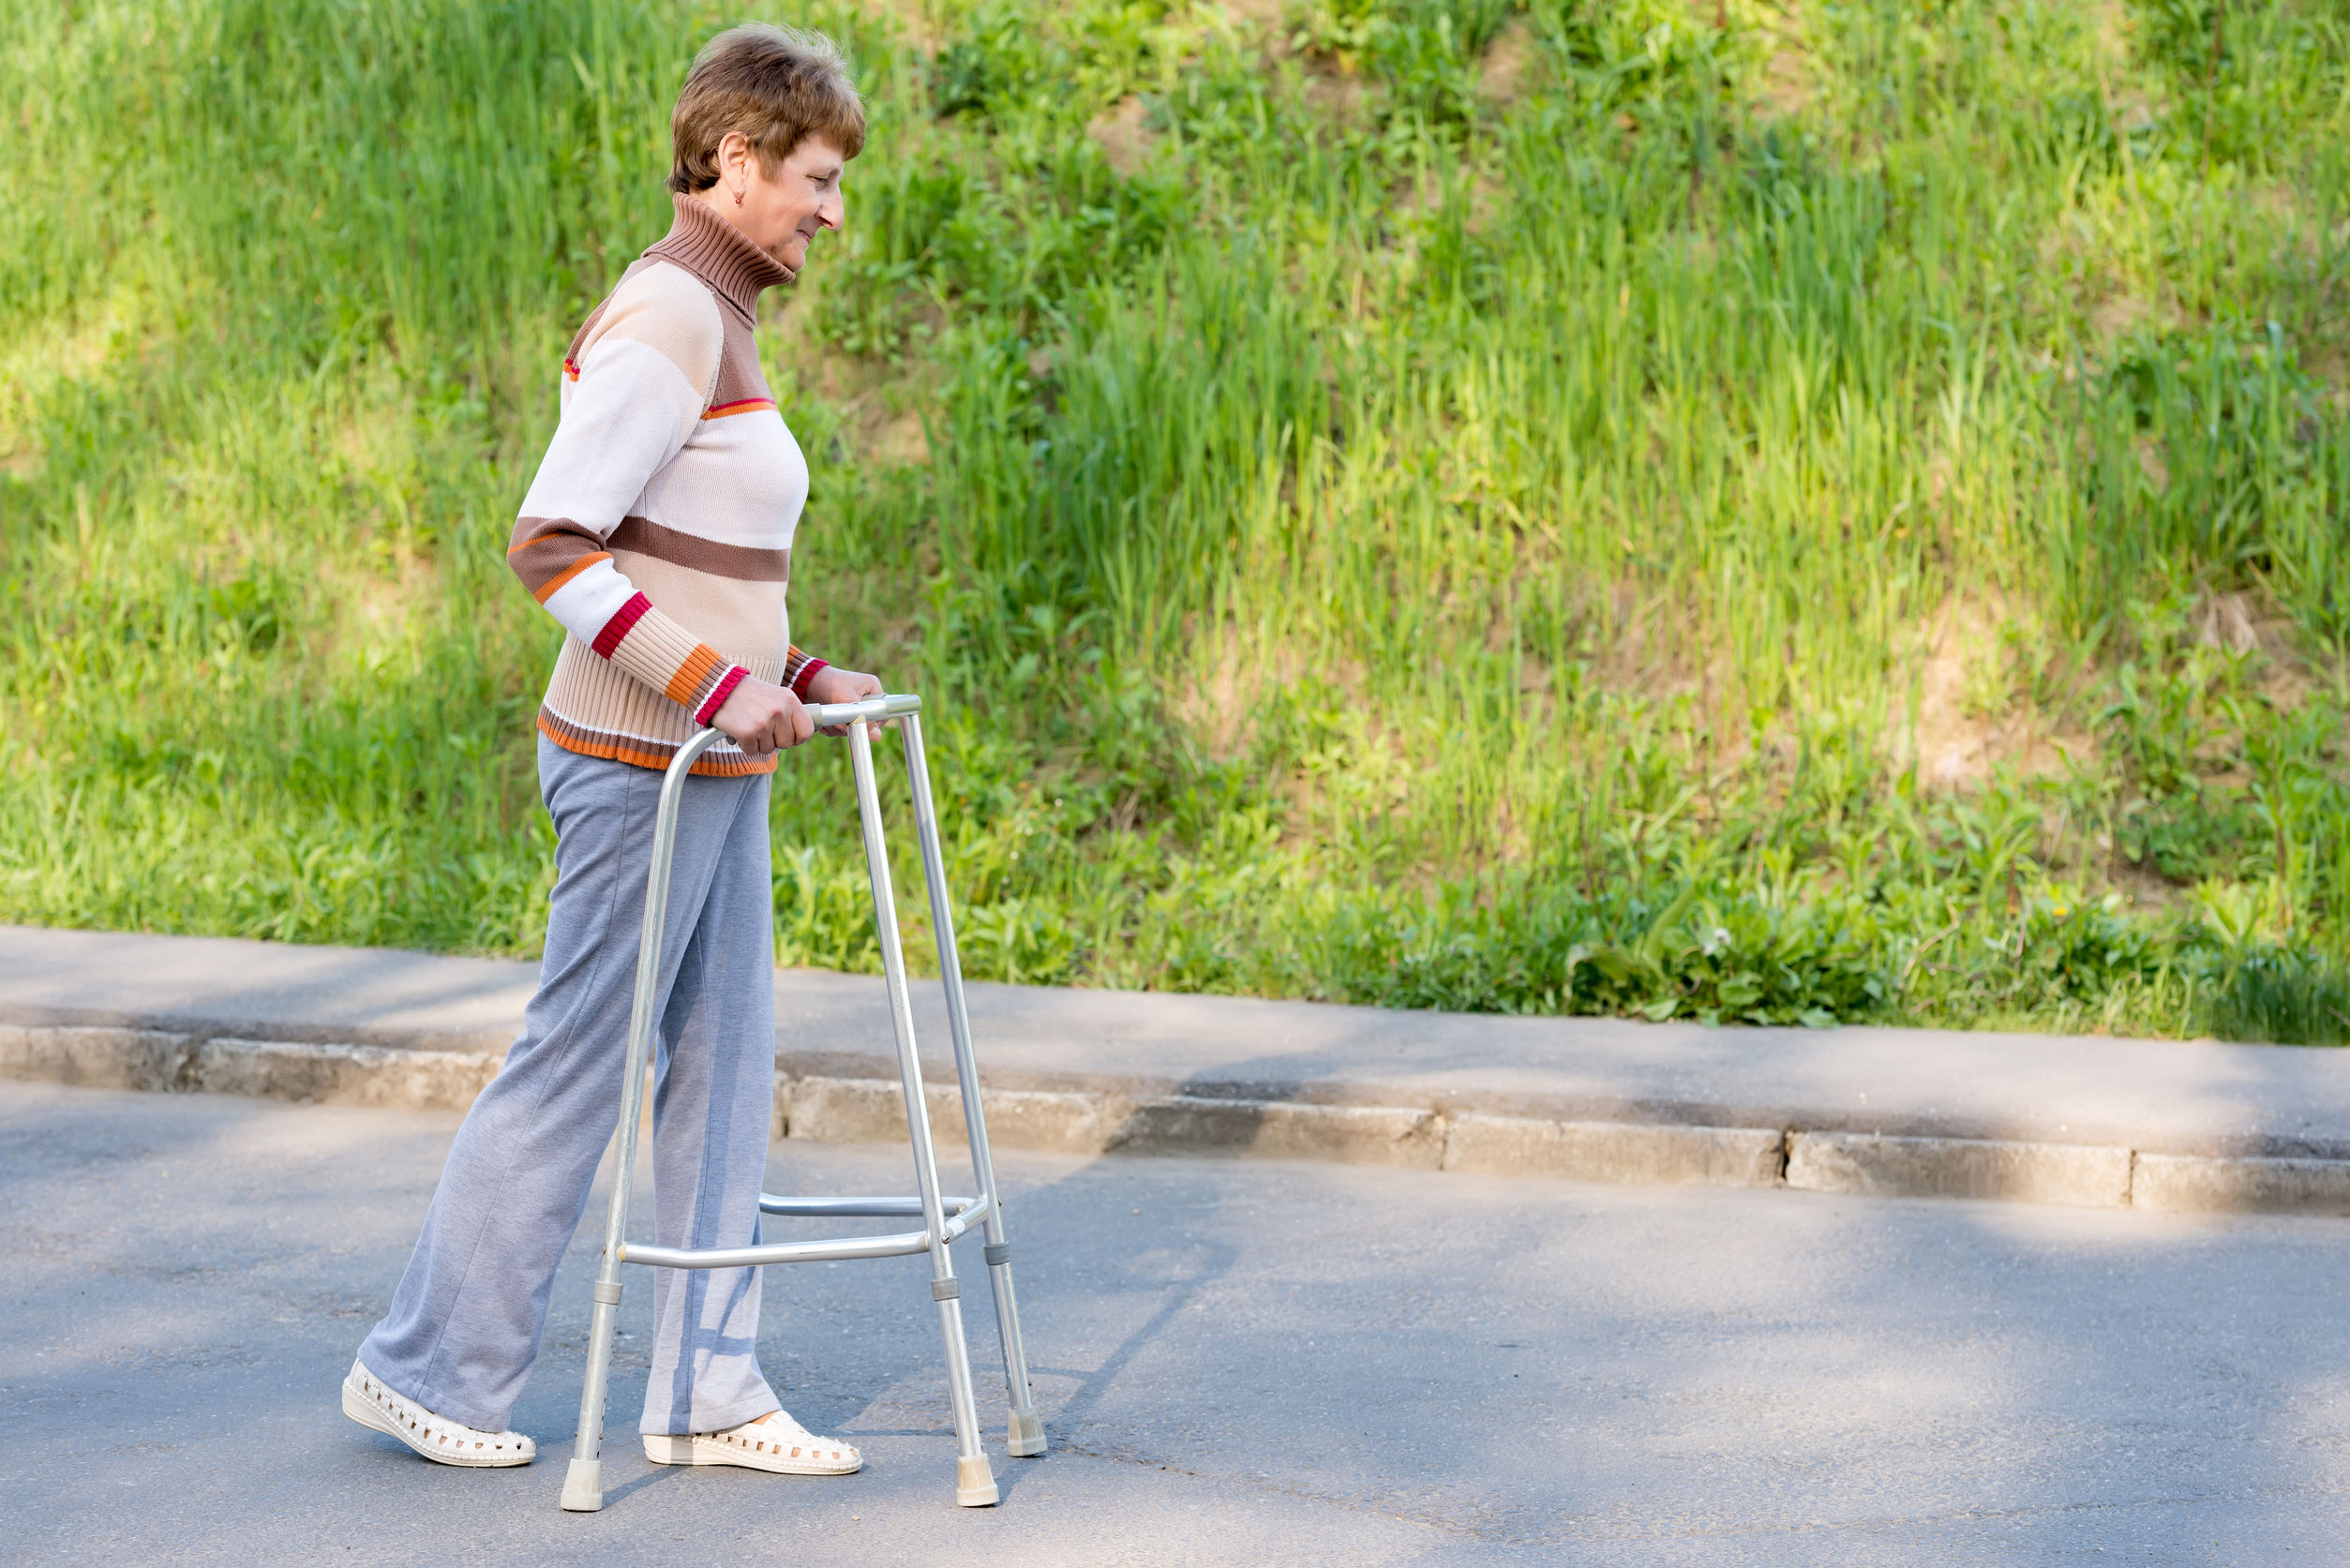 providing physical therapy outdoors